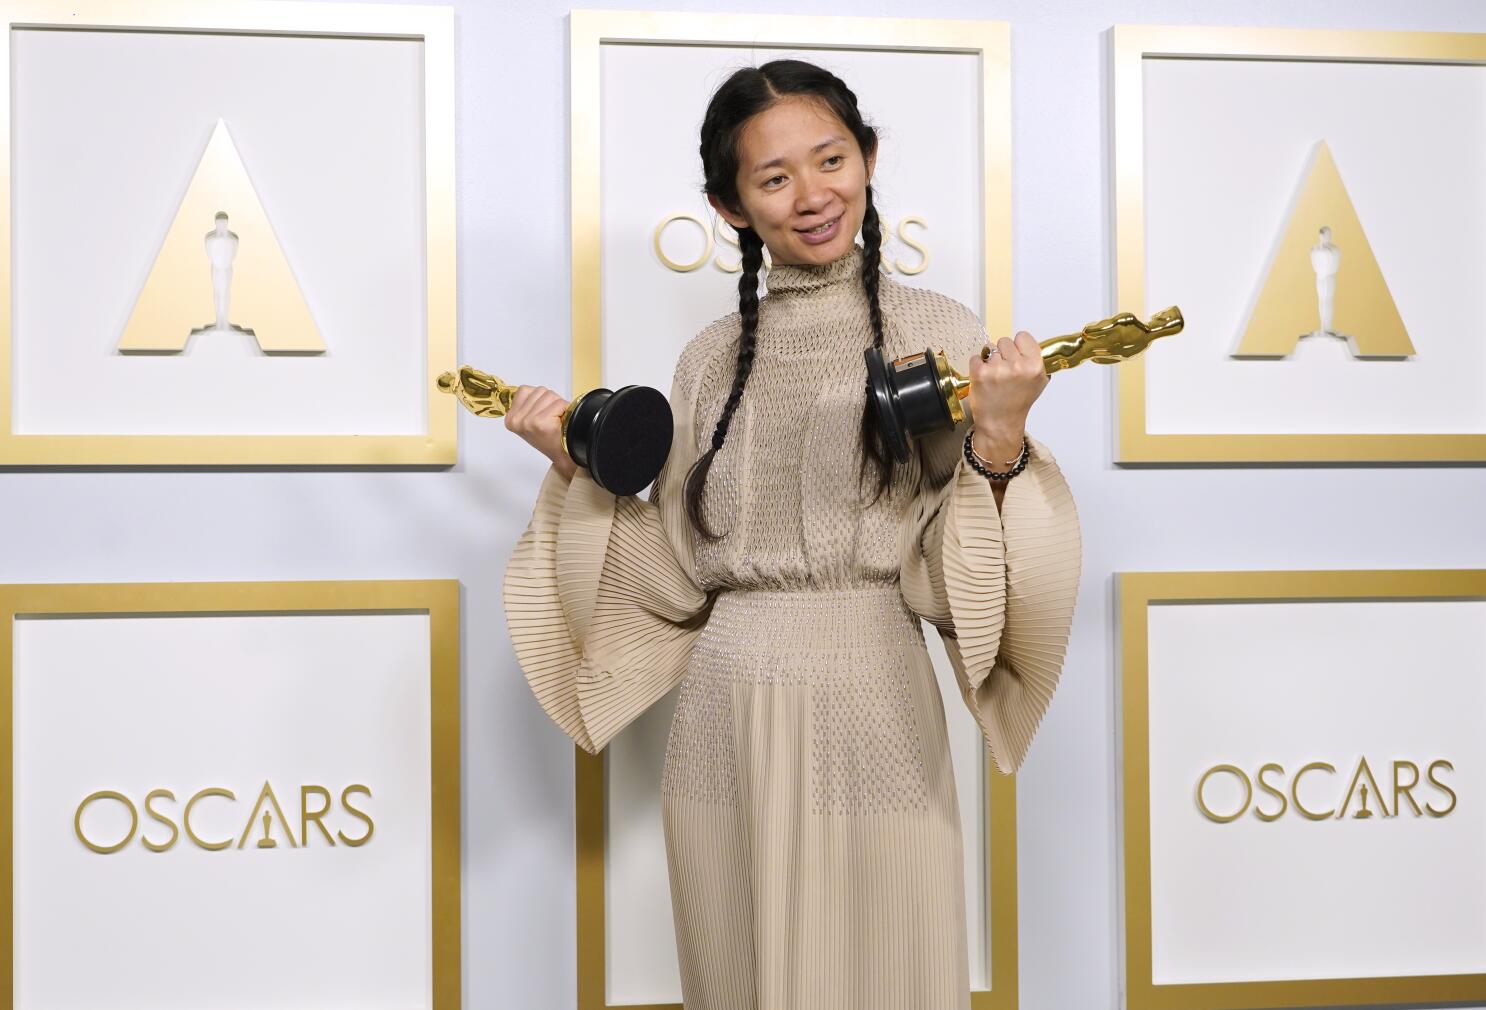 Oscars Nominations 2021: For the First Time, Two Women Are Up for